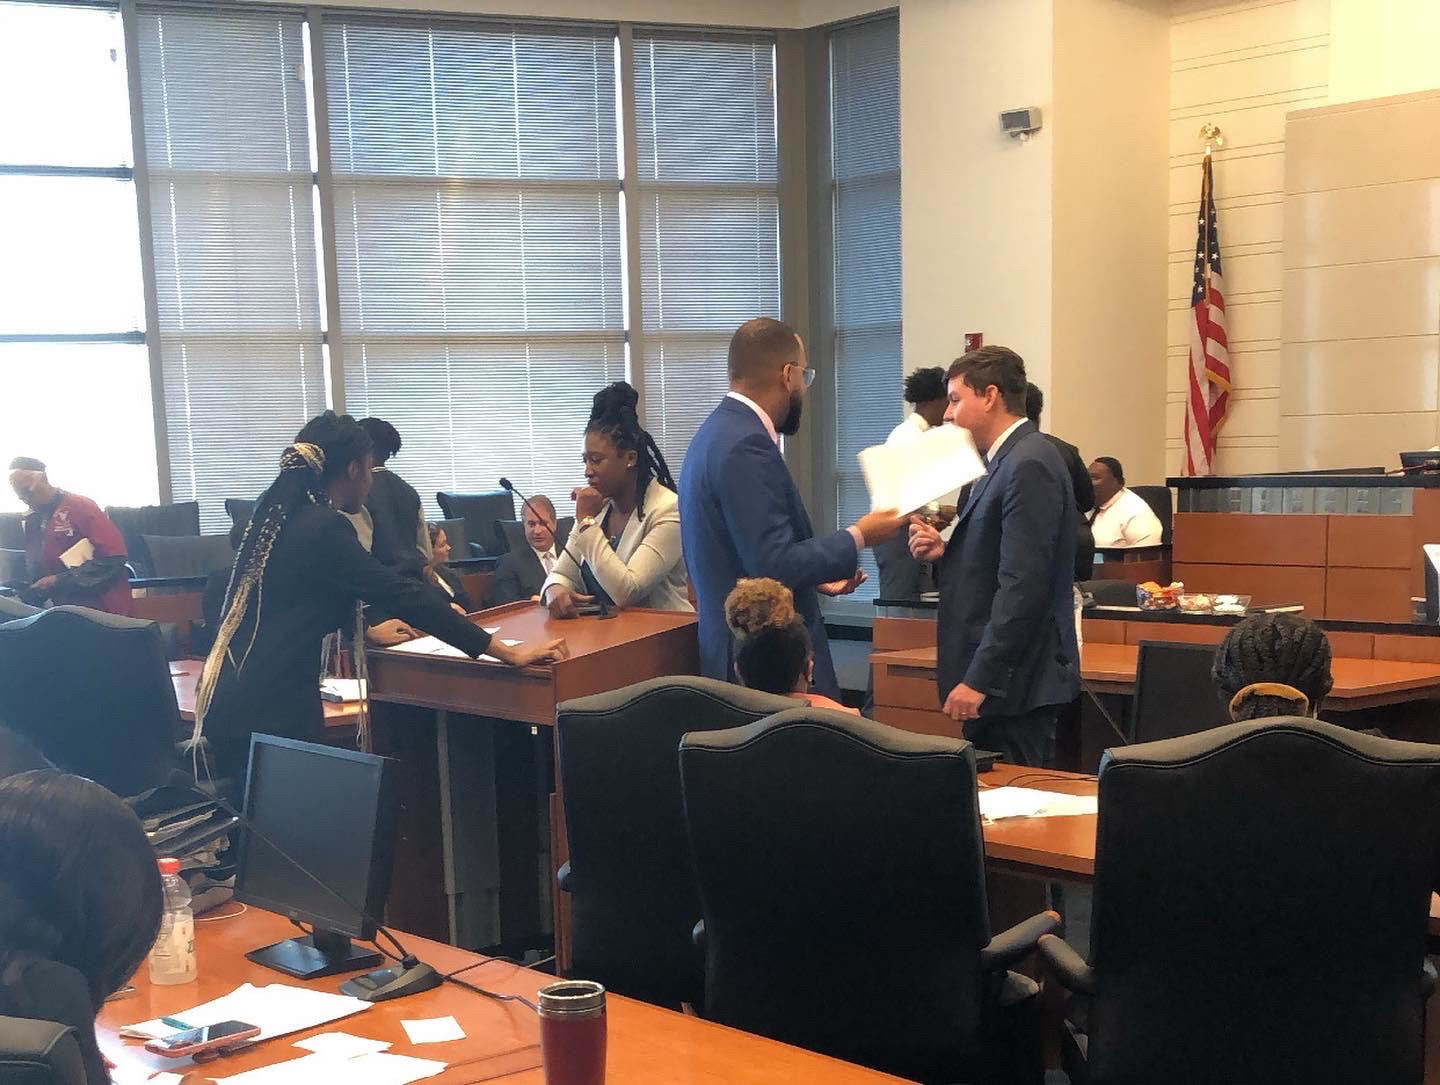 The mock trial competition in session at the Bryan Simpson U.S. Courthouse featuring students from William M. Raines and Jean Ribault high schools.